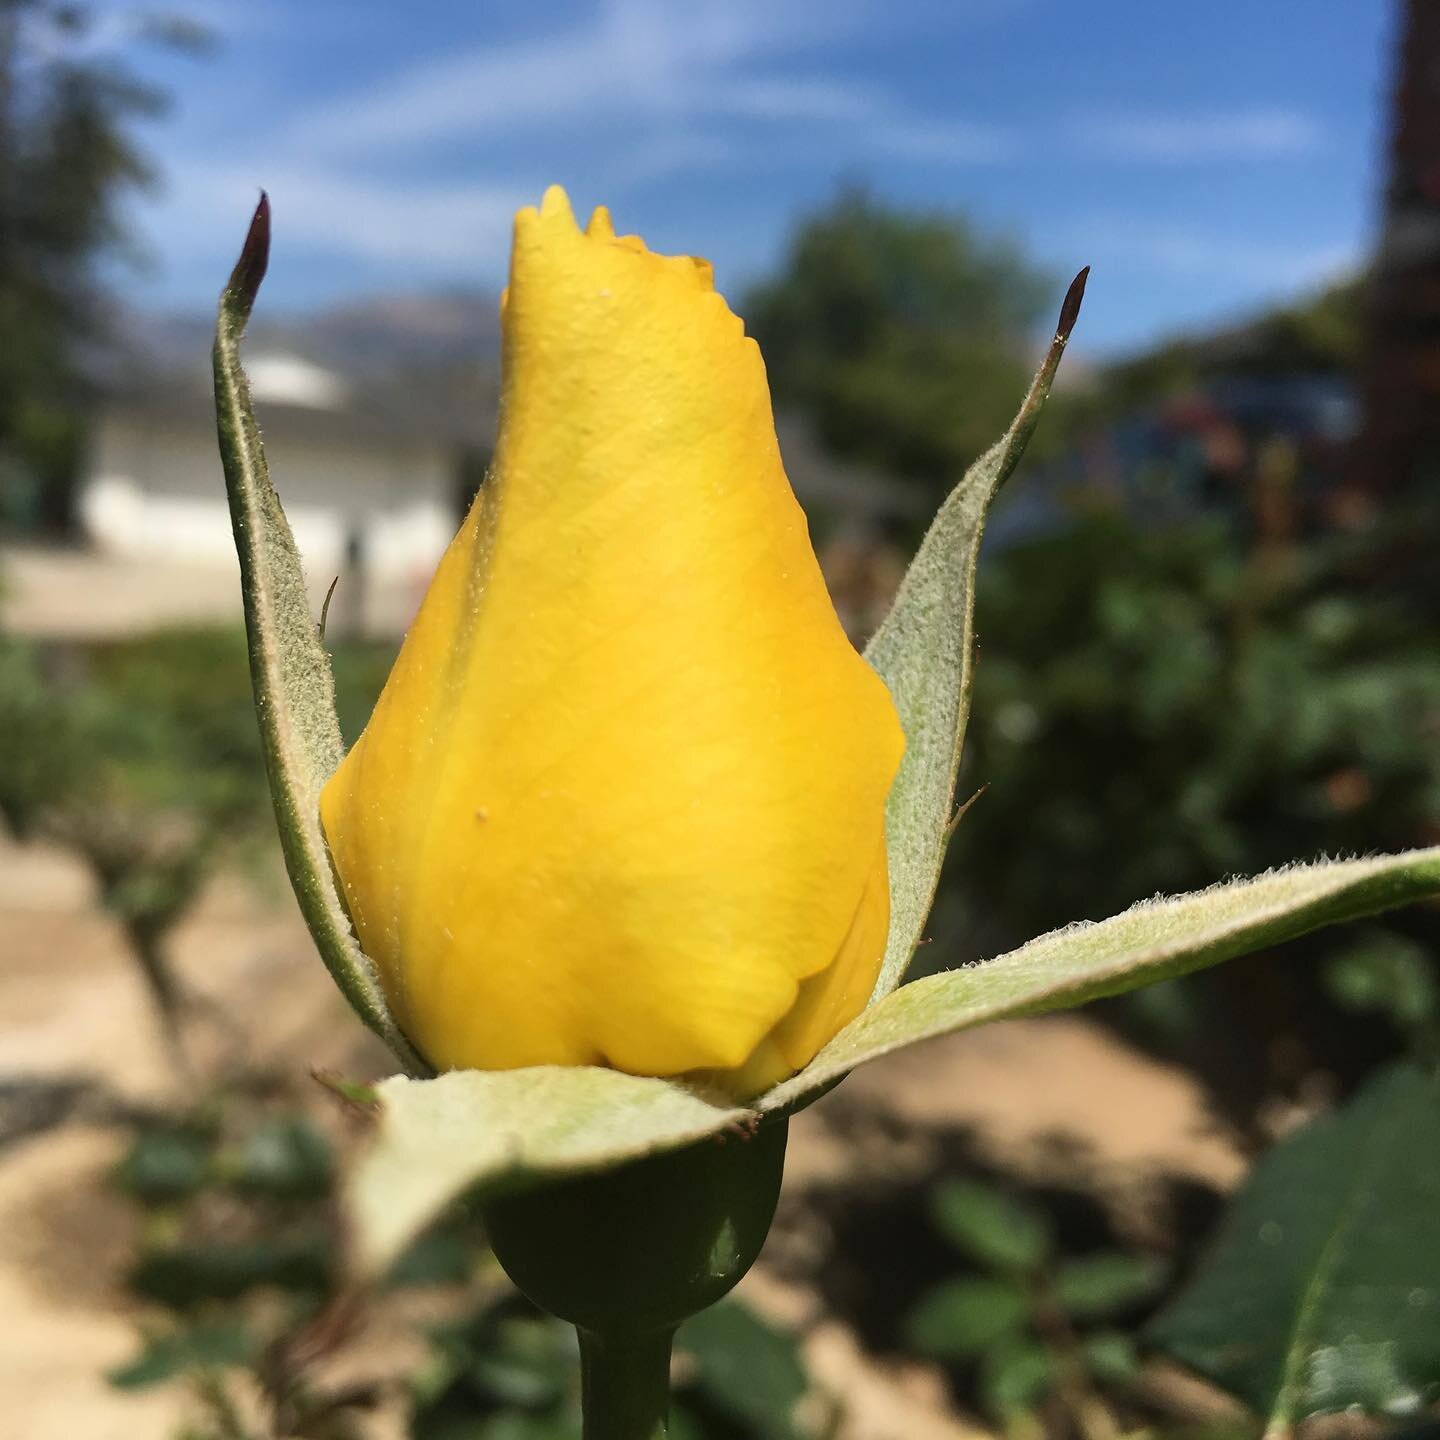 🌹My first buds of &lsquo;22! Perfect in their imperfection. Just like us.💐❤️
#roses #rosegarden #yellowrose #smelltheroses #loveroses #gardening

[ID: A closeup of a single yellow rosebud in a garden against a blue sky]